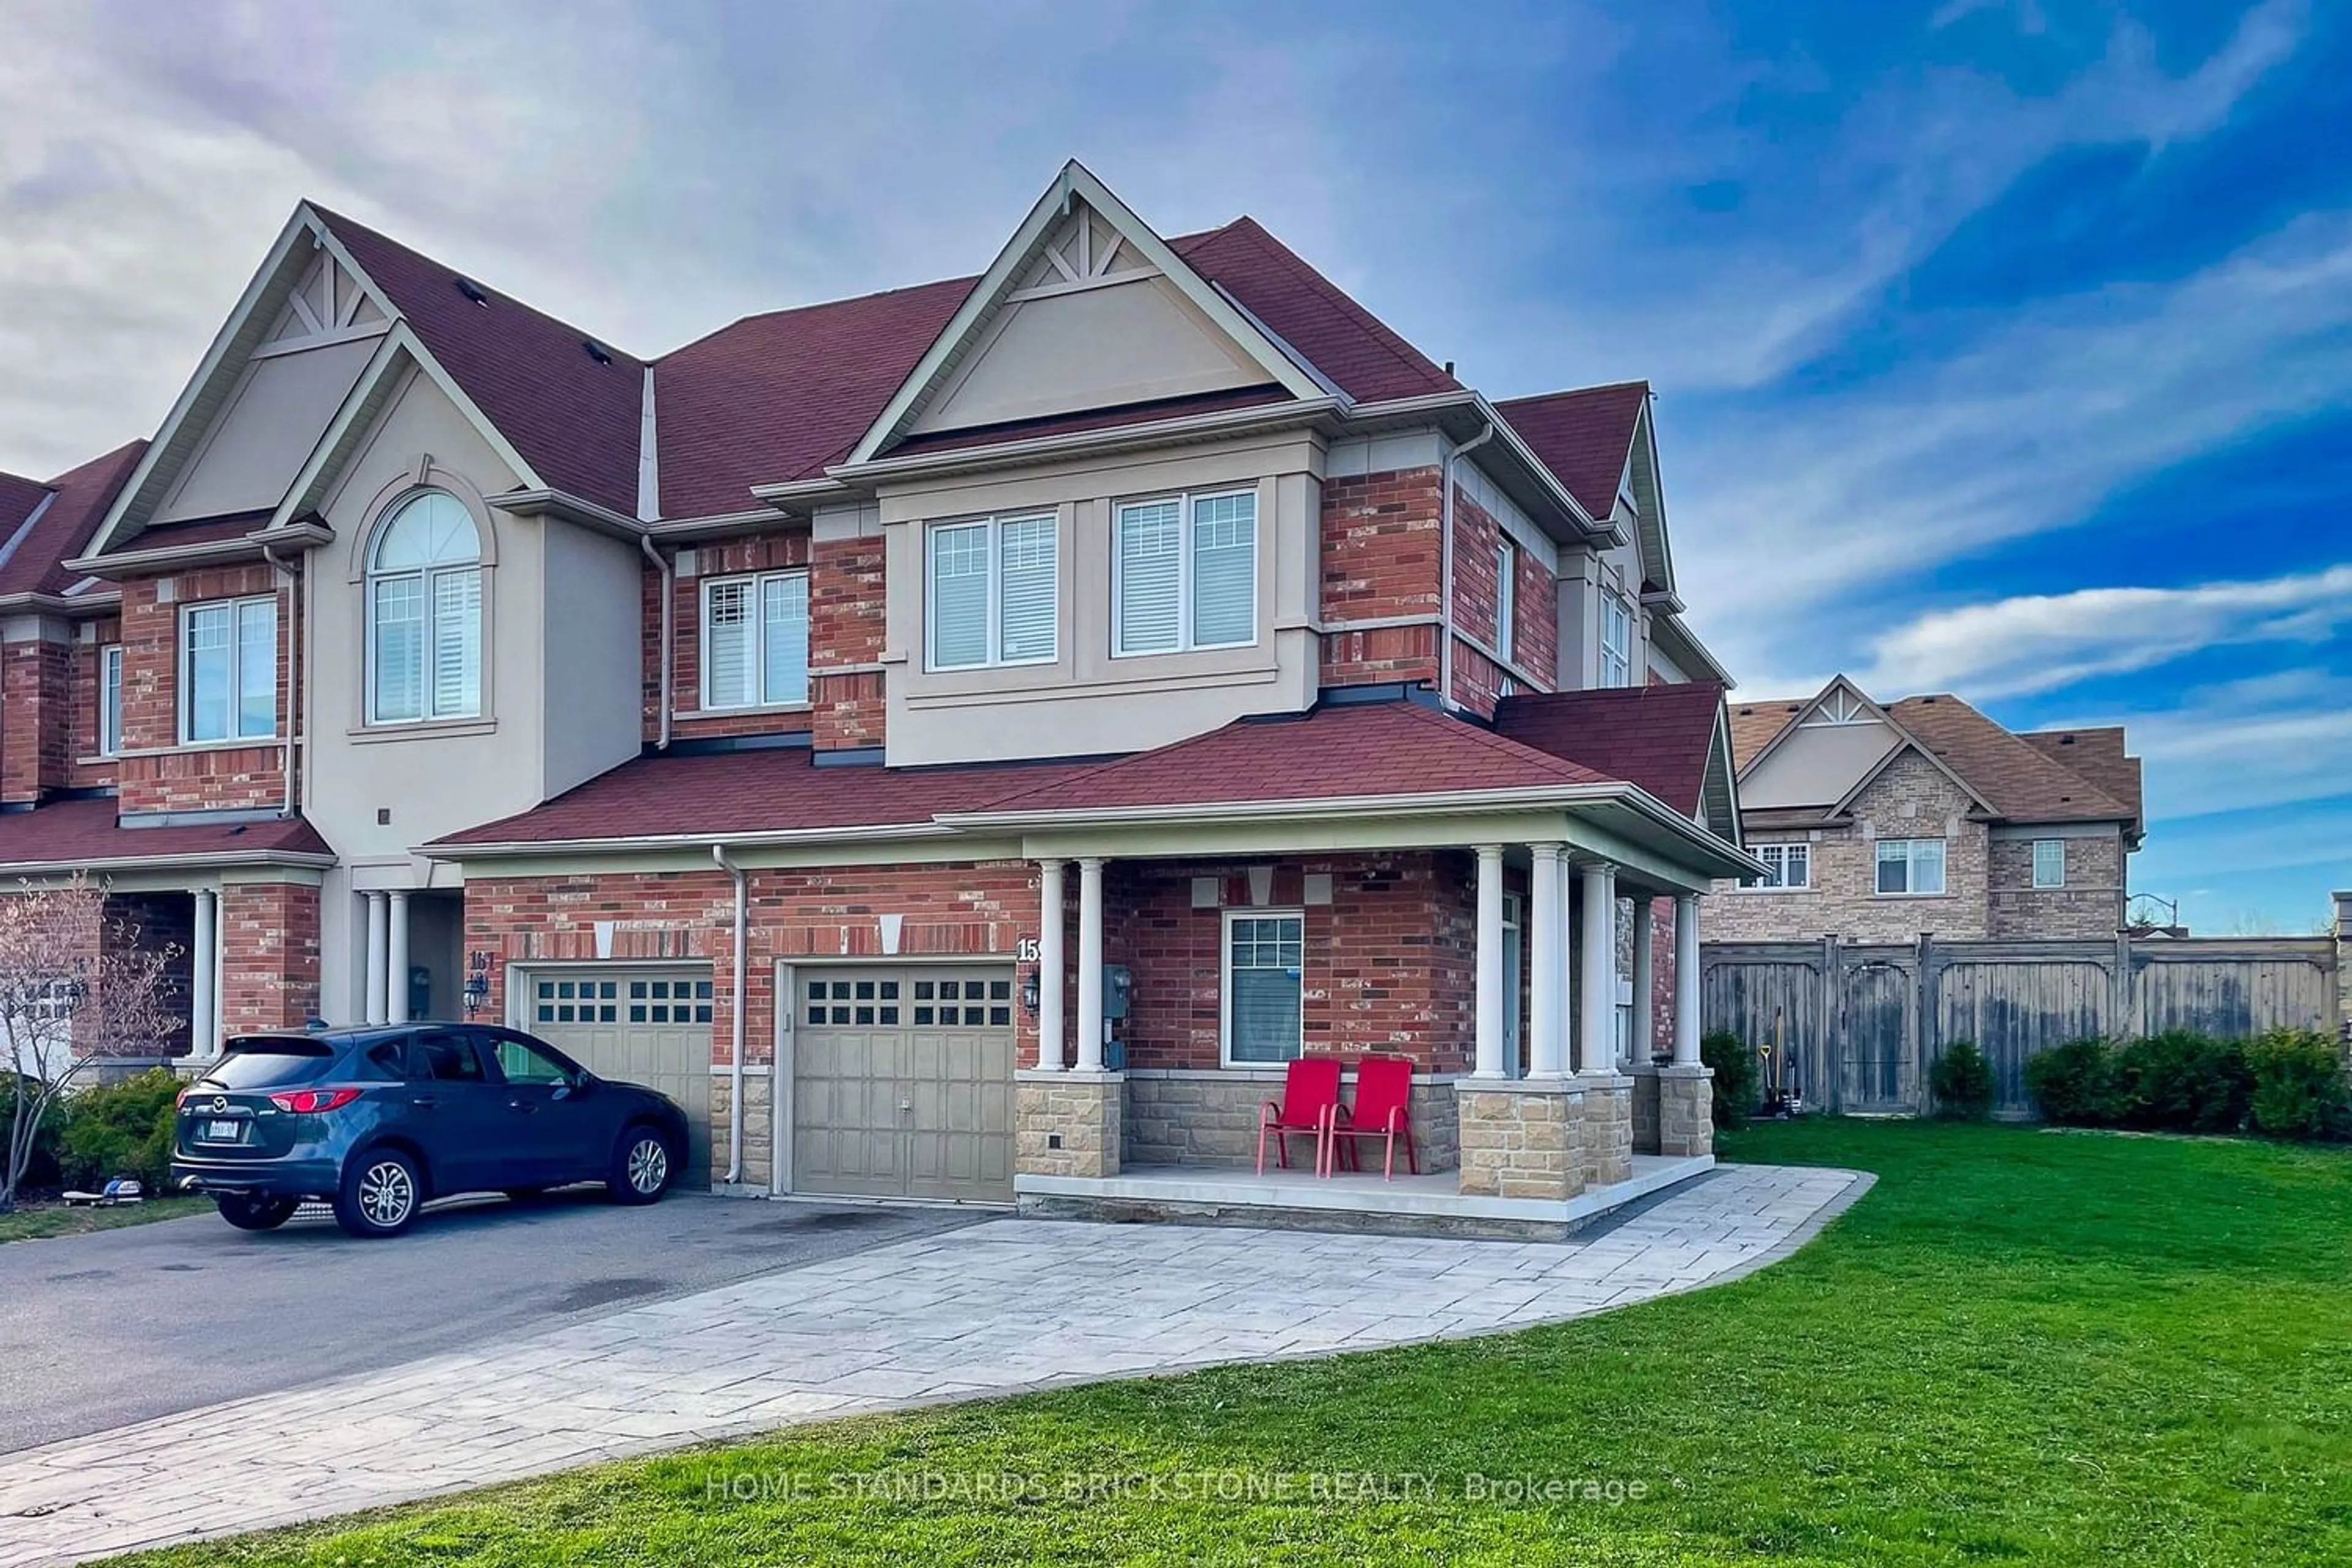 Home with brick exterior material for 159 Shale Cres, Vaughan Ontario L6A 4N5